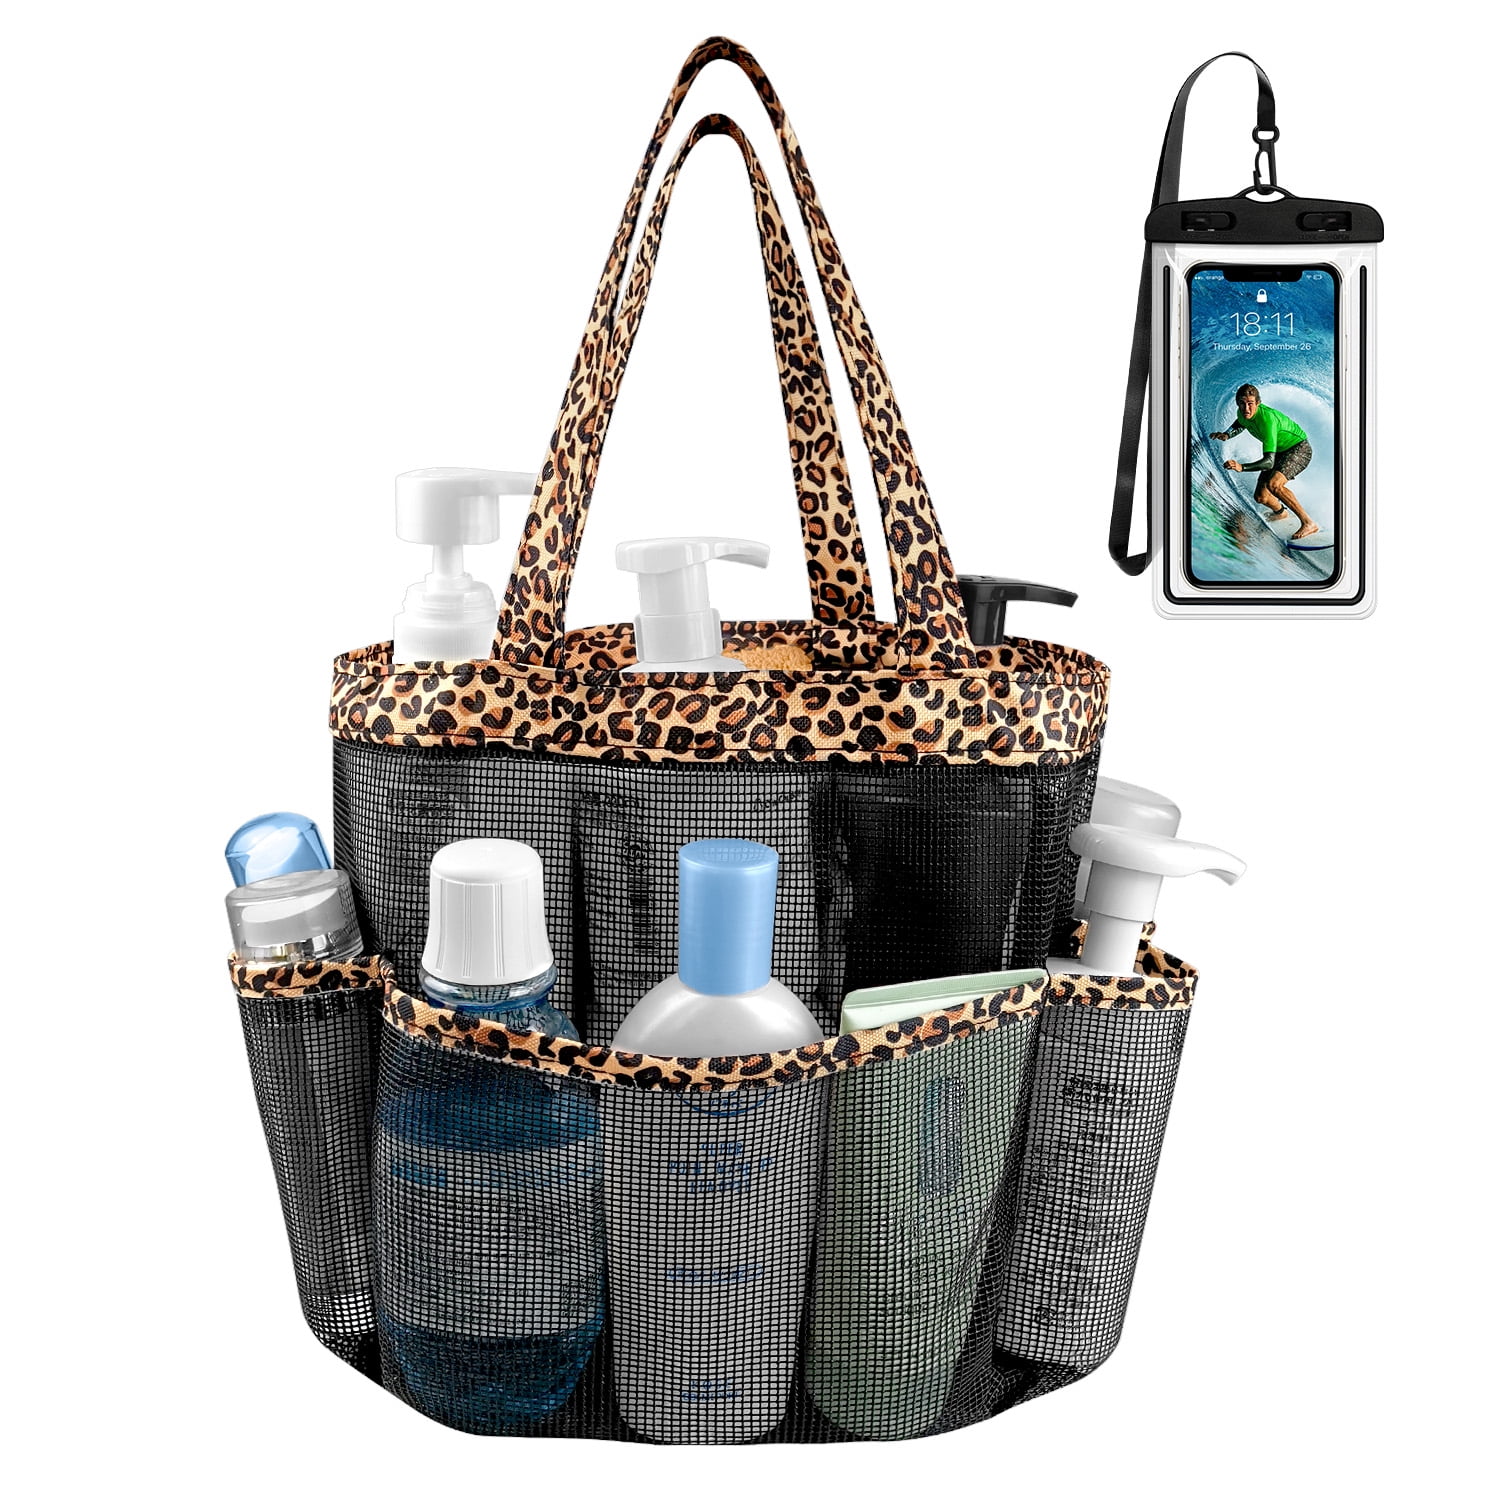 Shower Caddy Personalized, Waterproof Canvas Tote Bag, College